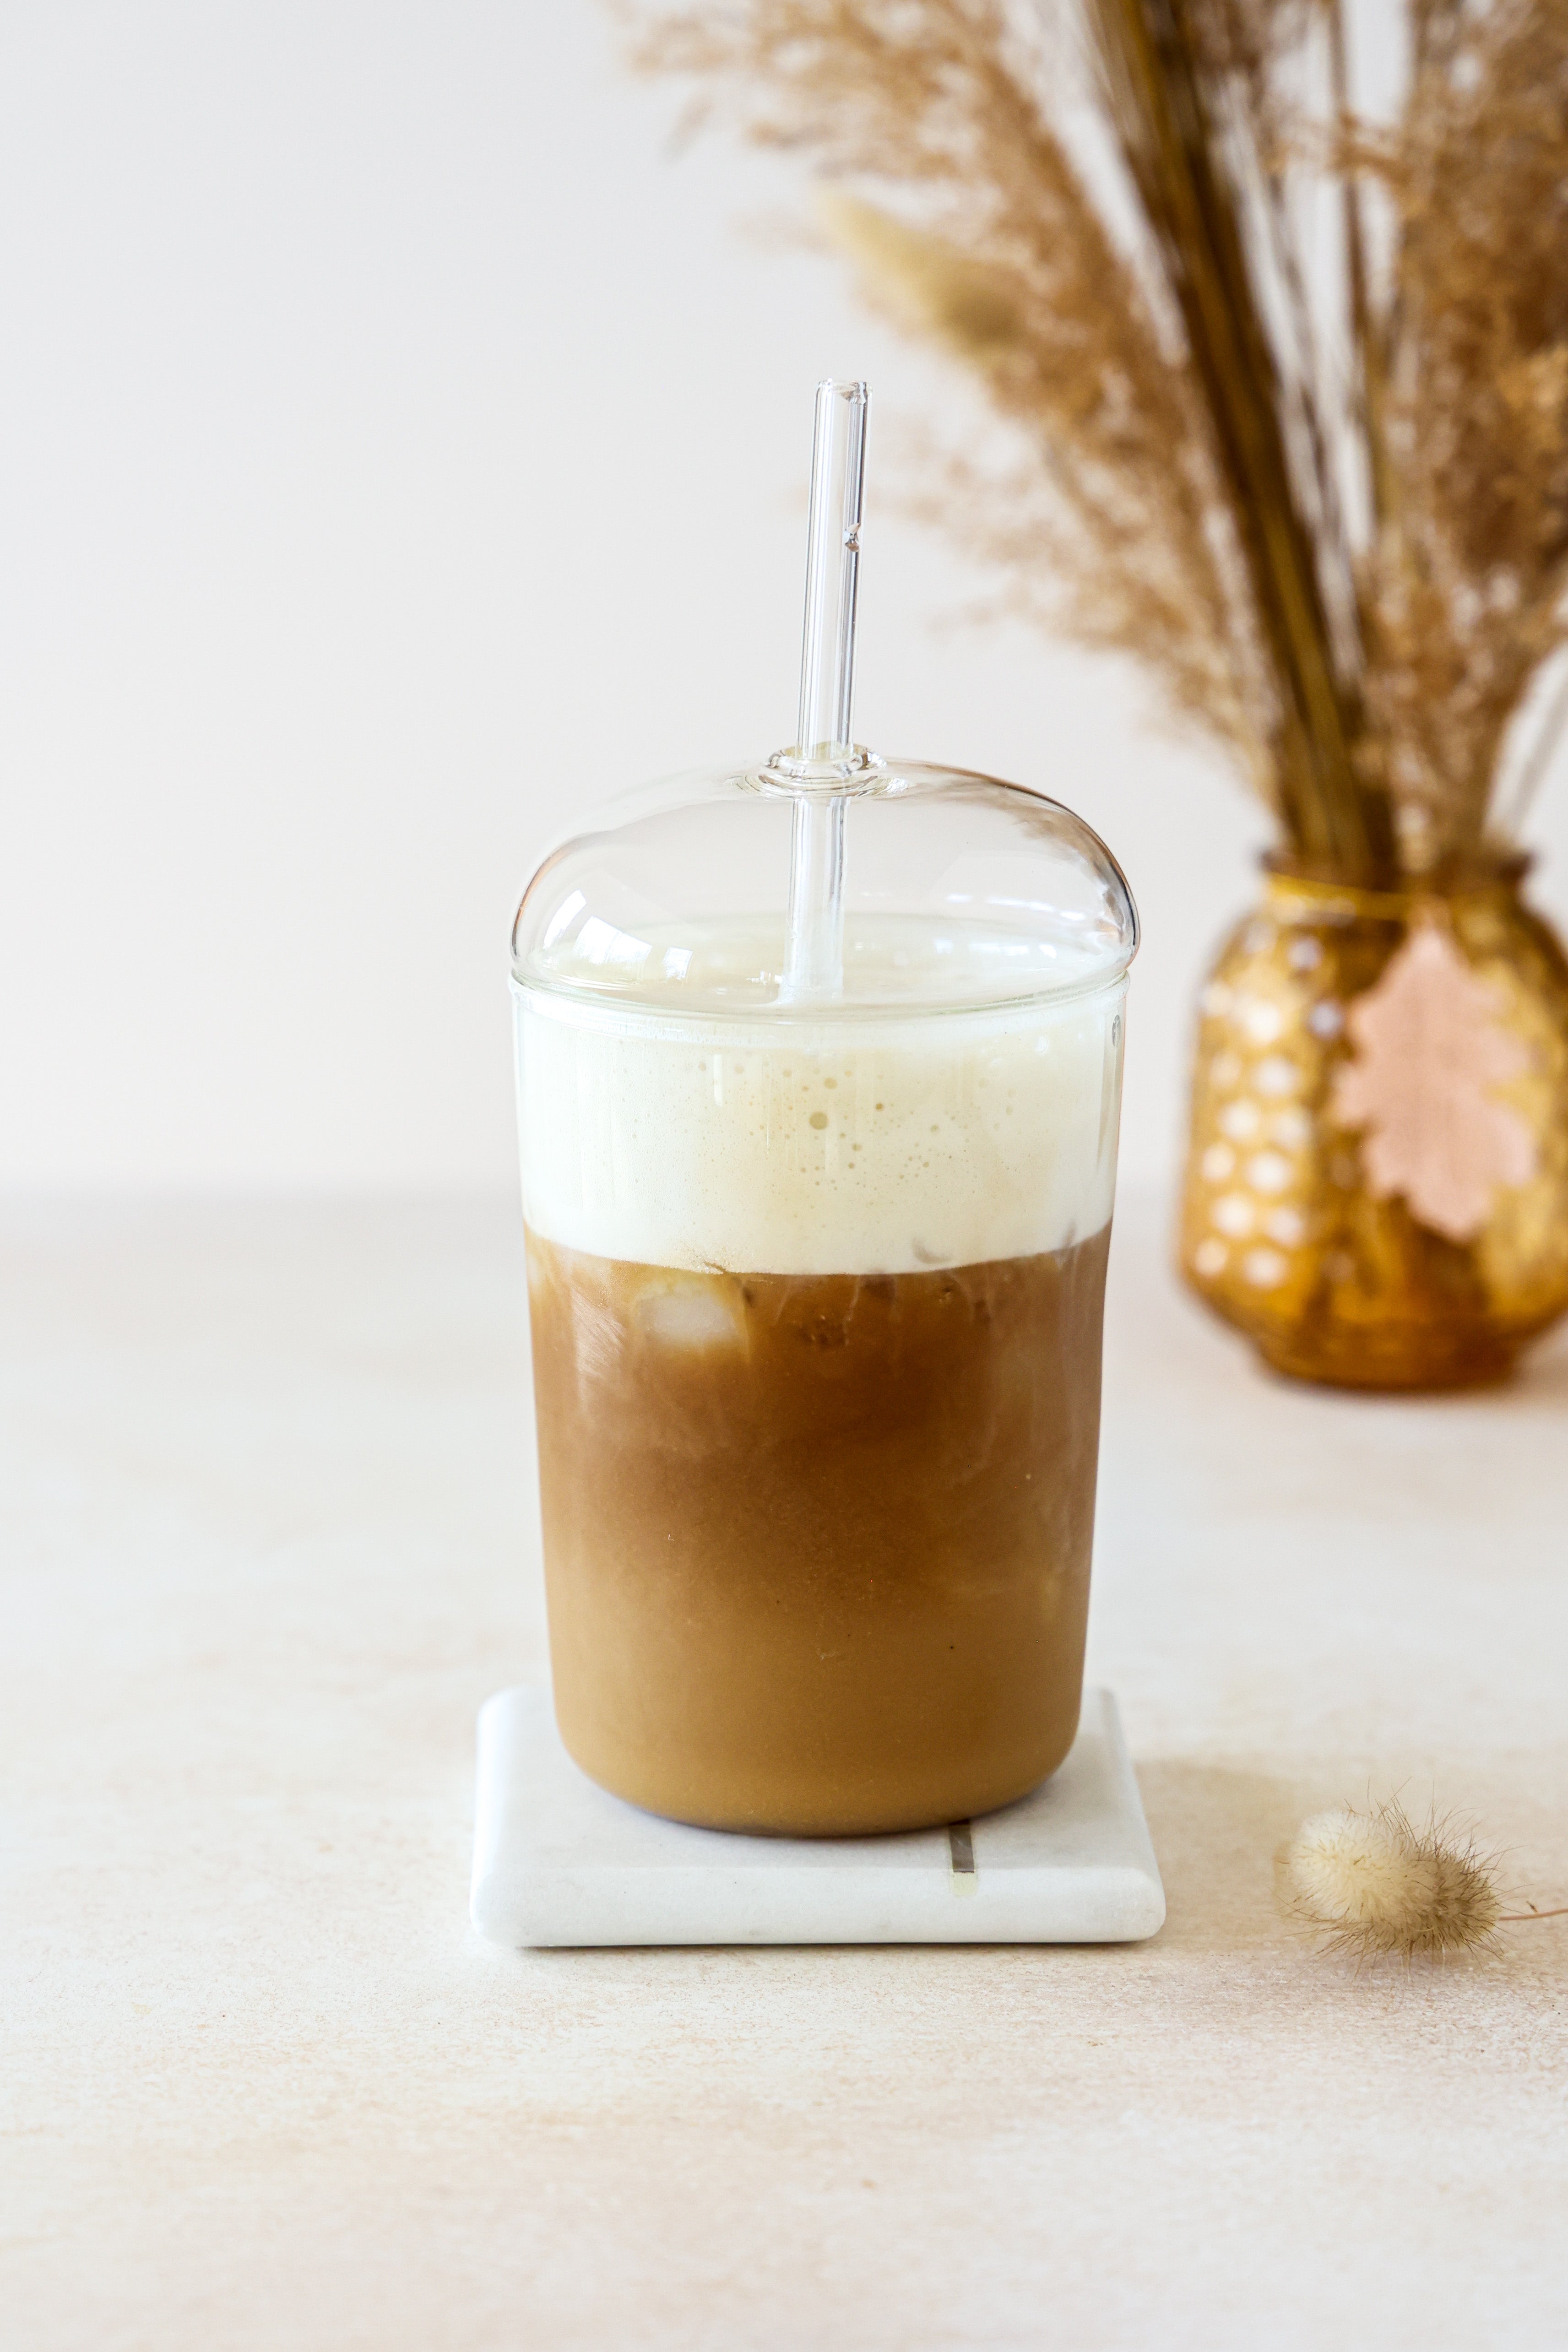 Welcome the Warm Weather with an Iced Latte – O'Neill Coffee